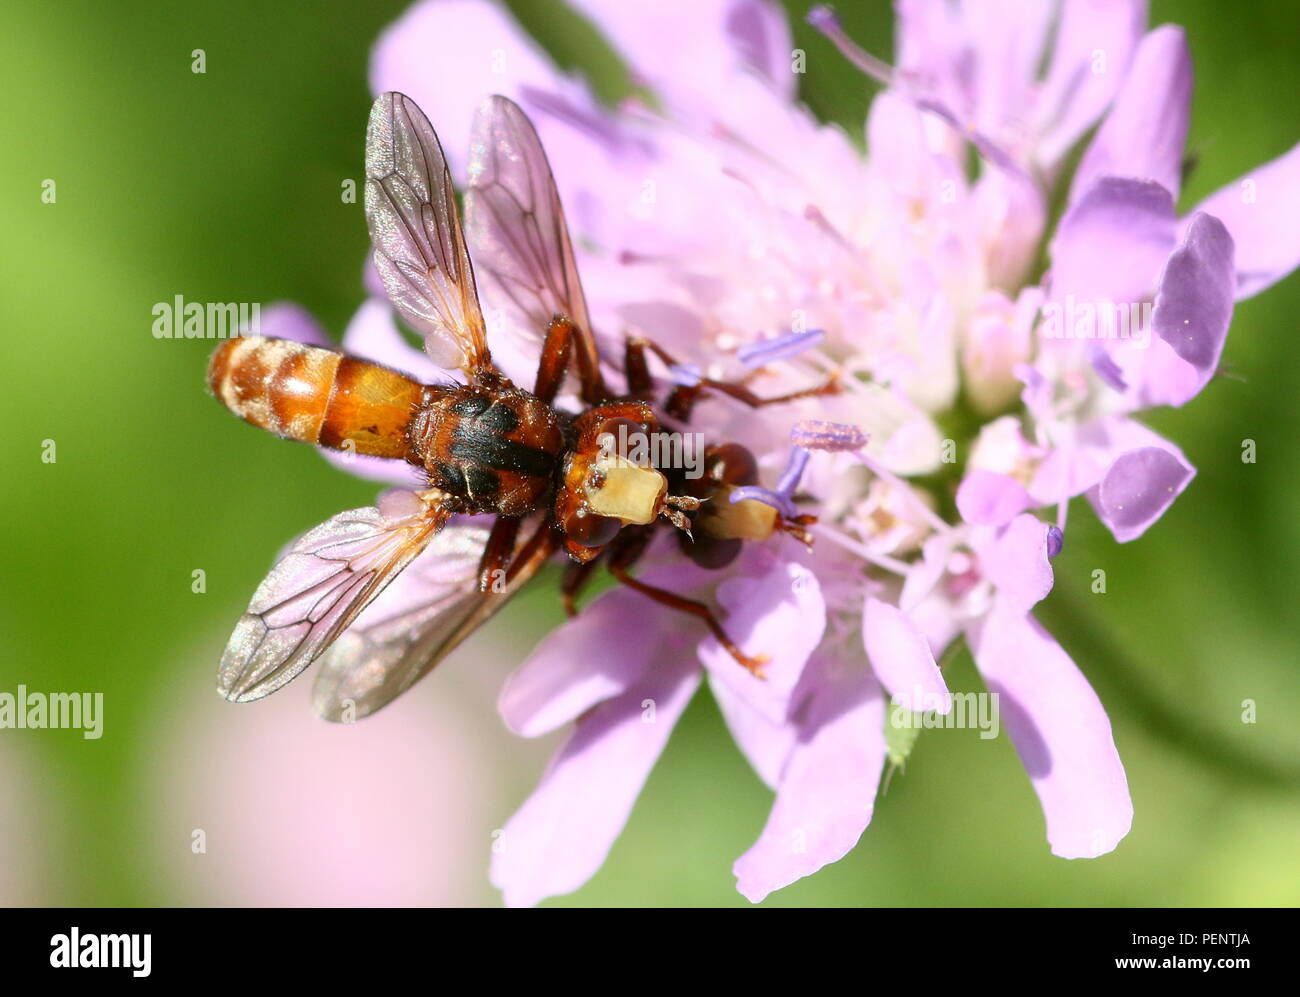 Mating European Common thick-headed Fly (Sicus ferrugineus - Conopidae)  on a pink mist flower Stock Photo